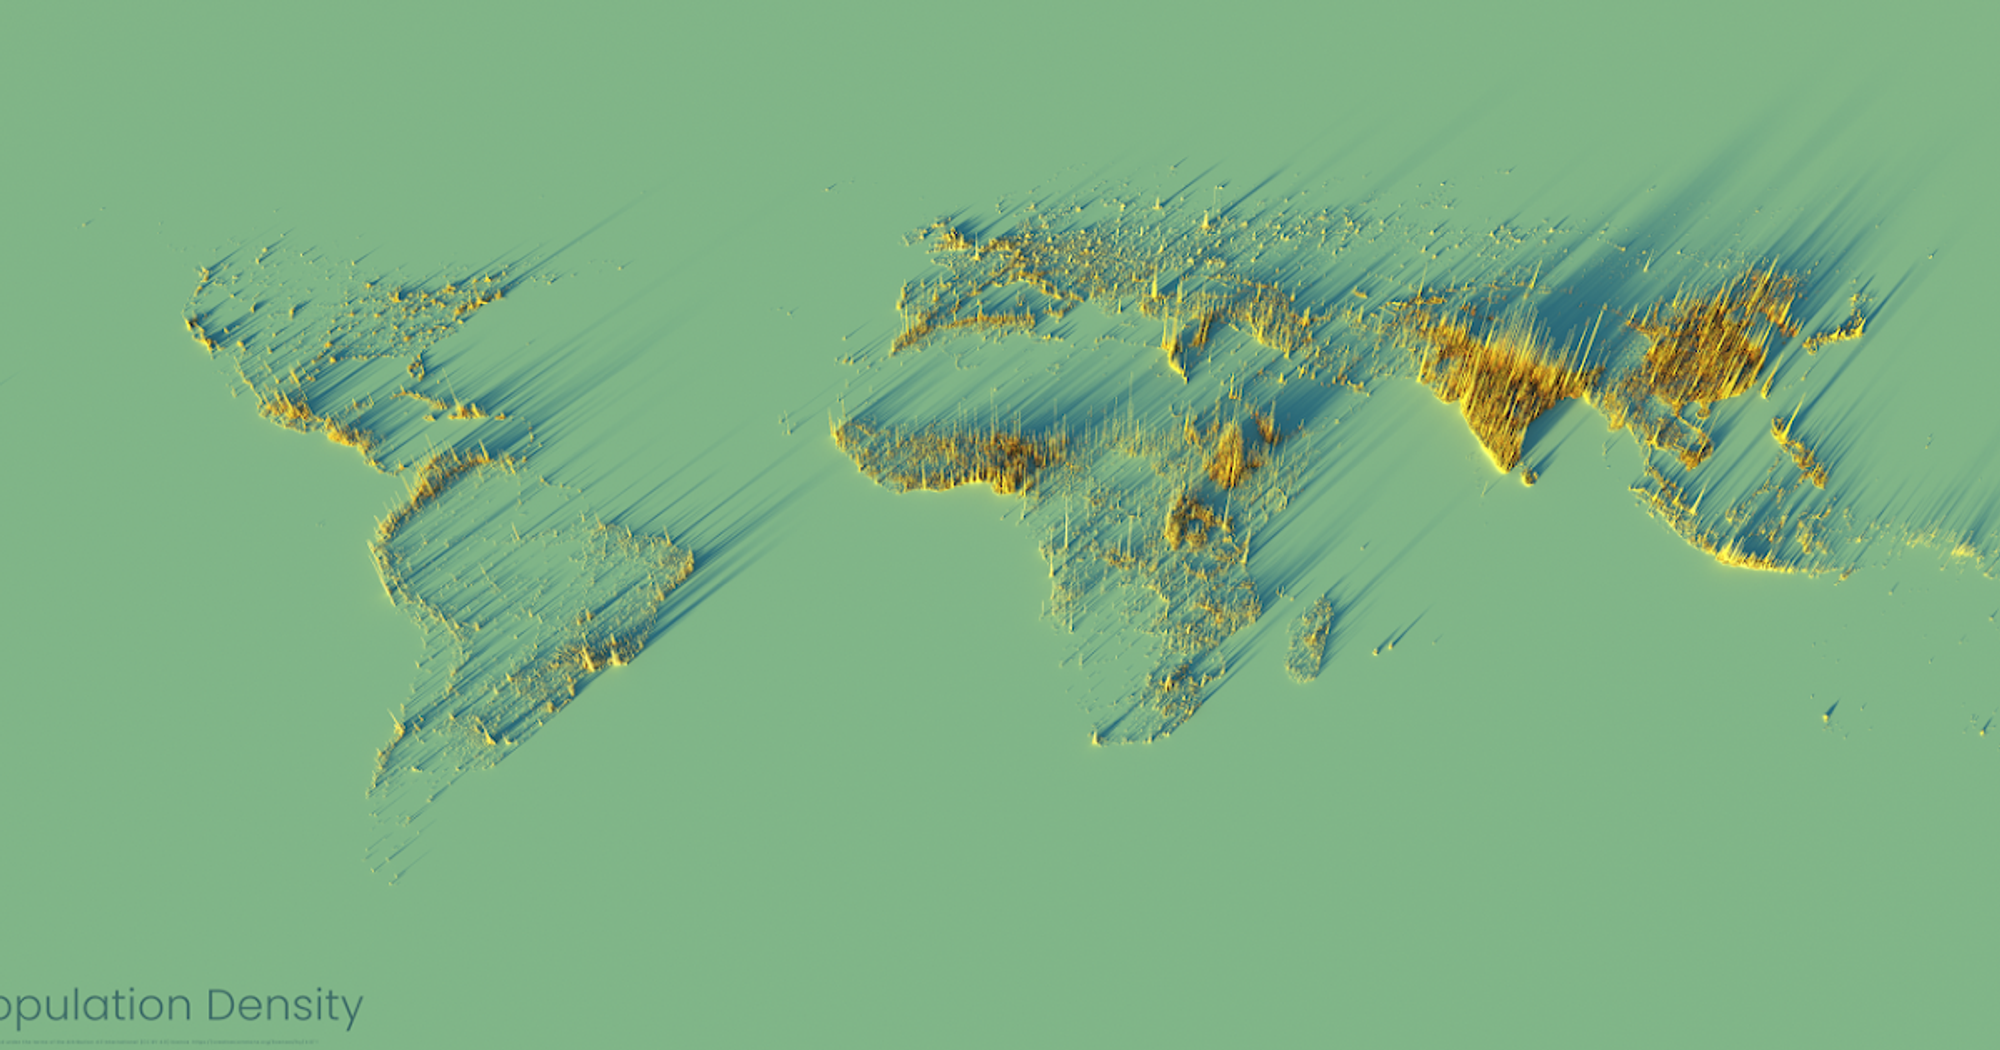 How to make a 3D population density render for any country in the world